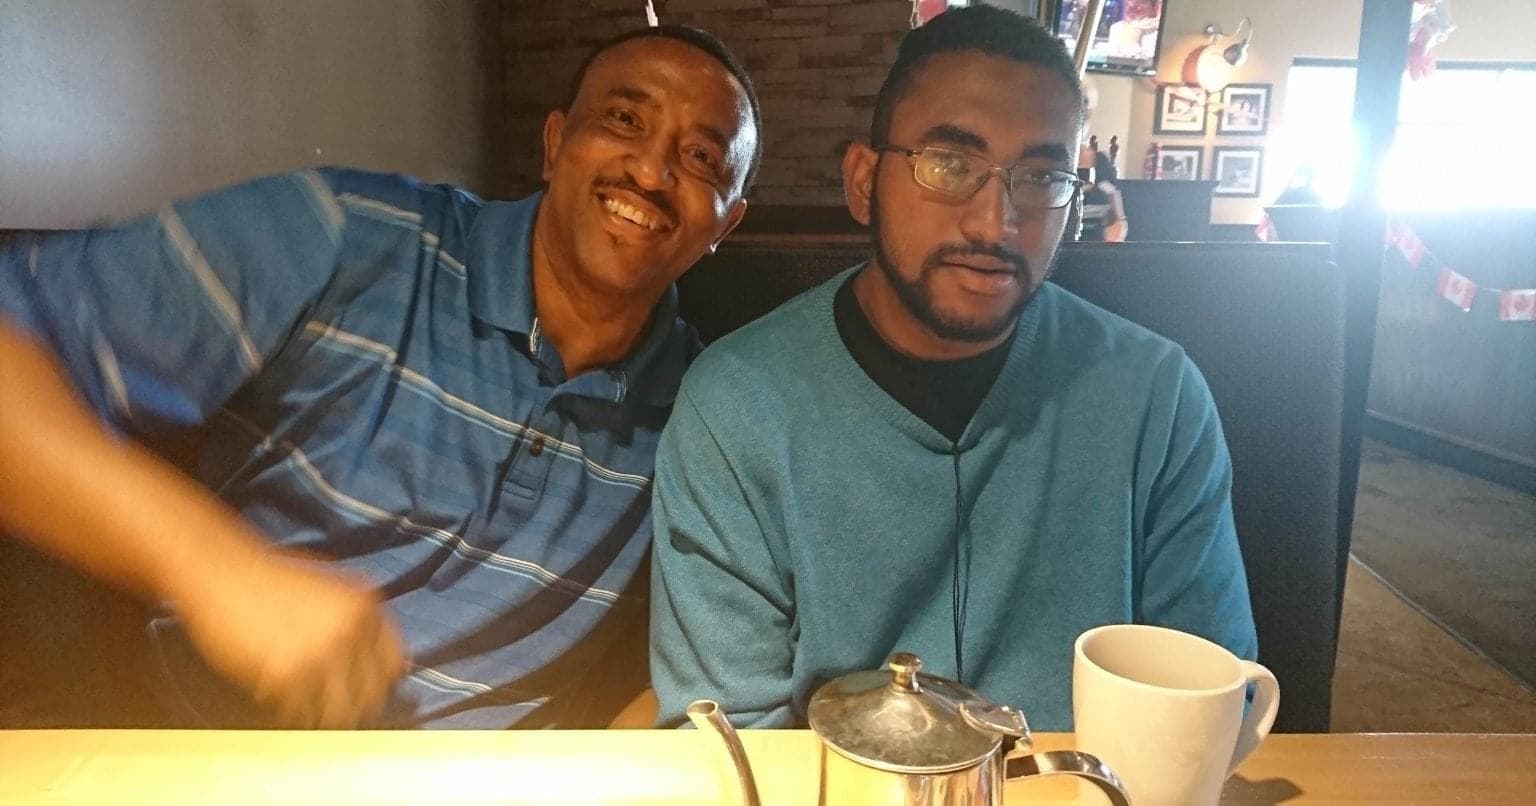 Two Black men sit in a booth at a restaurant. Both are wearing blue shirts. There is a tea pot and coffee mug on the table. 